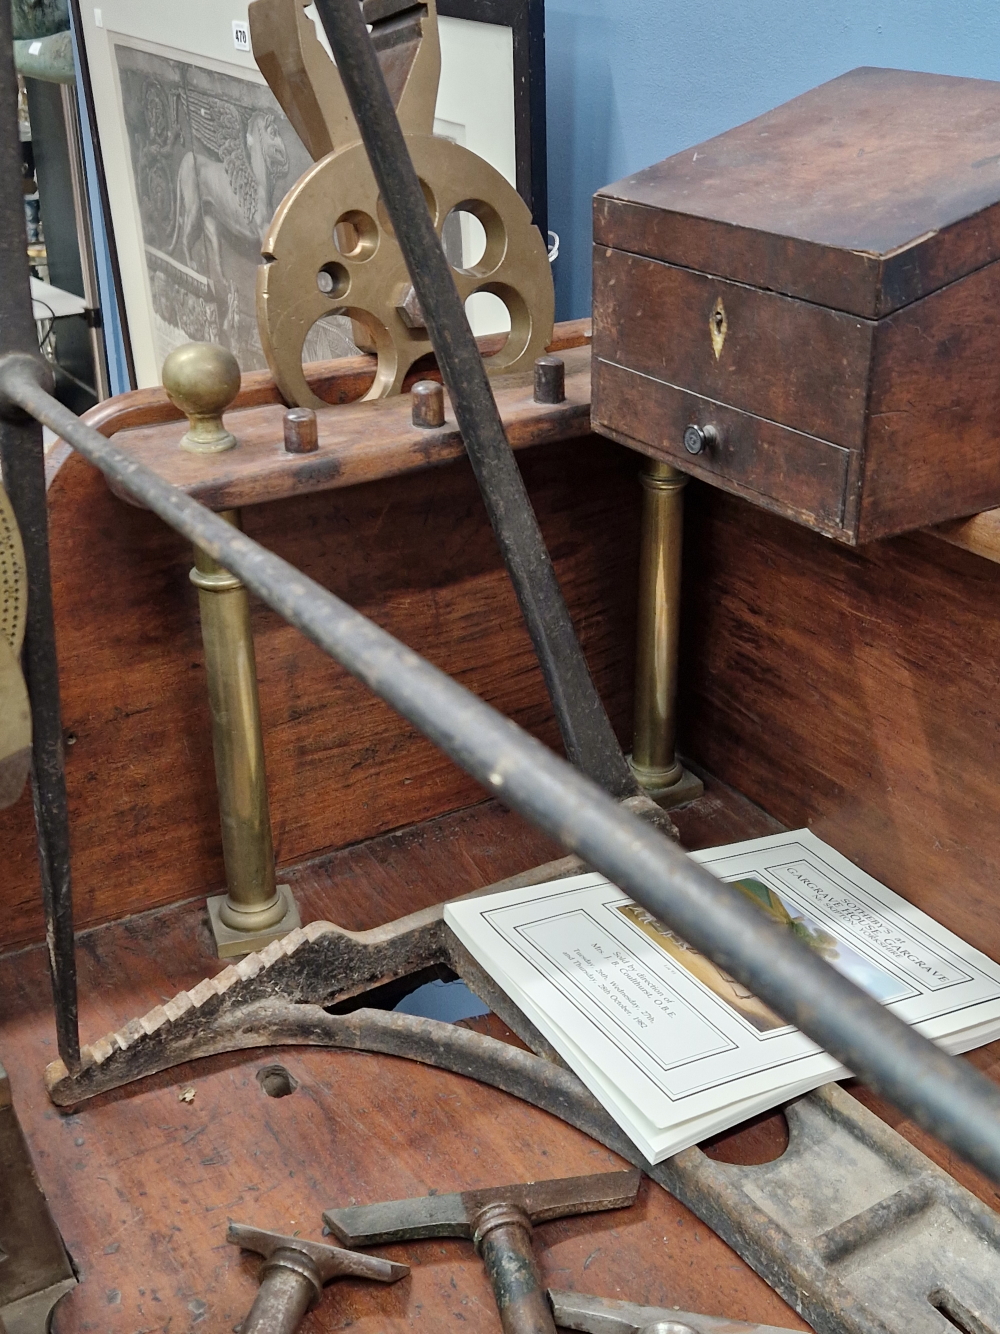 A RARE MID 19TH CENTURY BRASS AND IRON ORNAMENTAL TURNING LATHE SIGNED C. RICH, 44 DENMARK STREET - Image 76 of 77